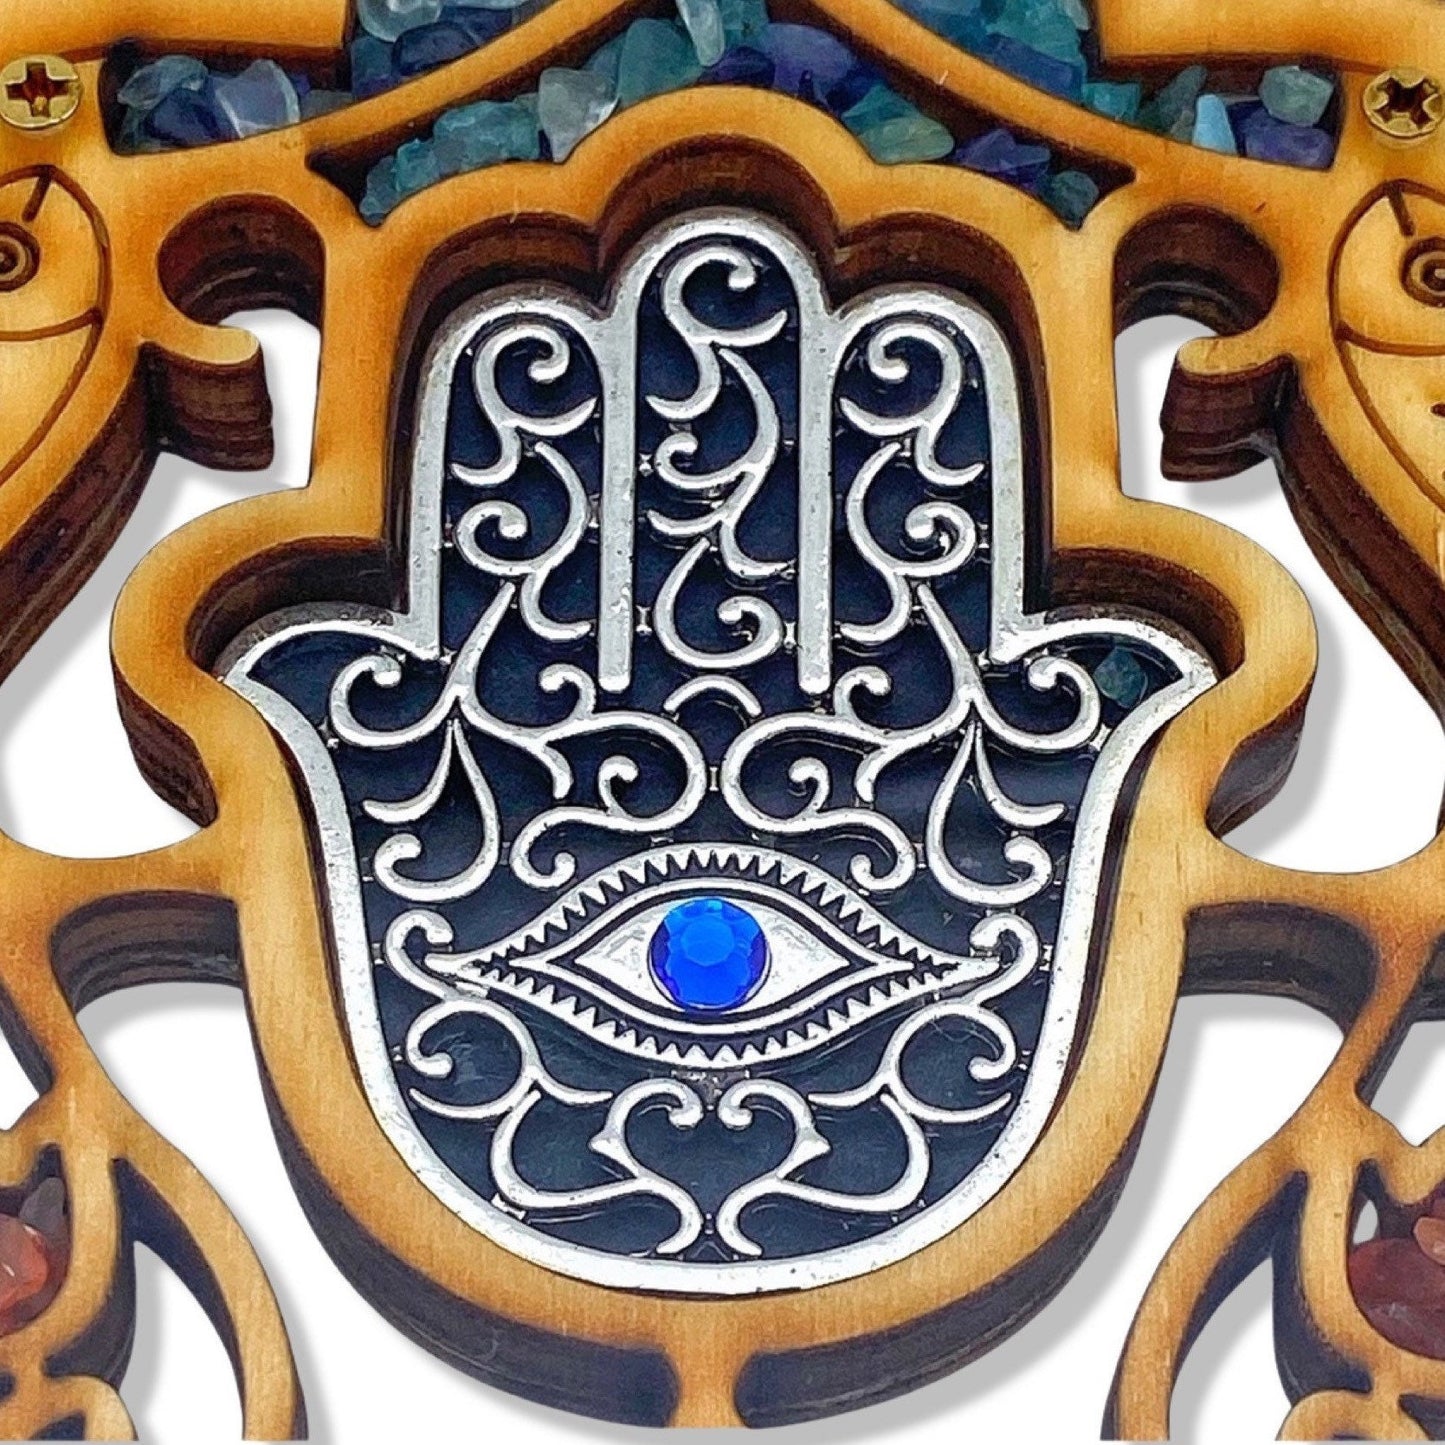 Wood Double Hamsa Home Blessing